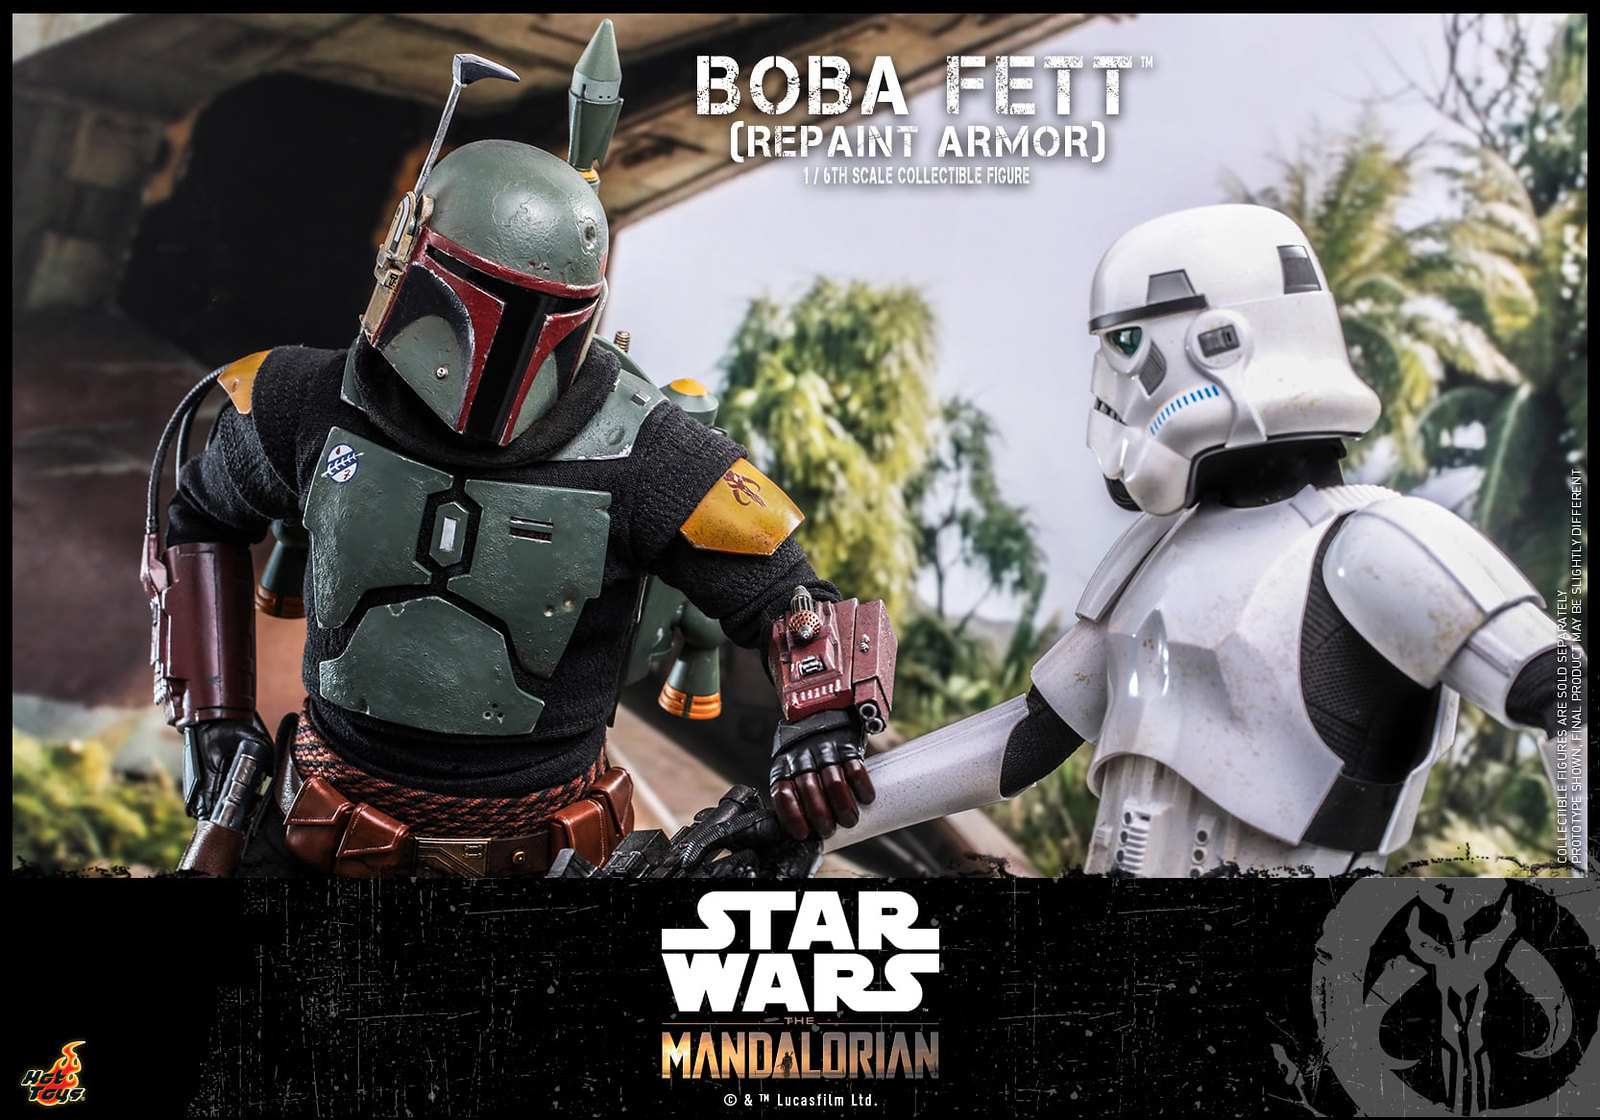 Star Wars: The Mandalorian™ - 1/6th scale Boba Fett™ (Repaint Armor) Collectible figure/ figure and Throne Collectible Set 51310543097_5068808283_h